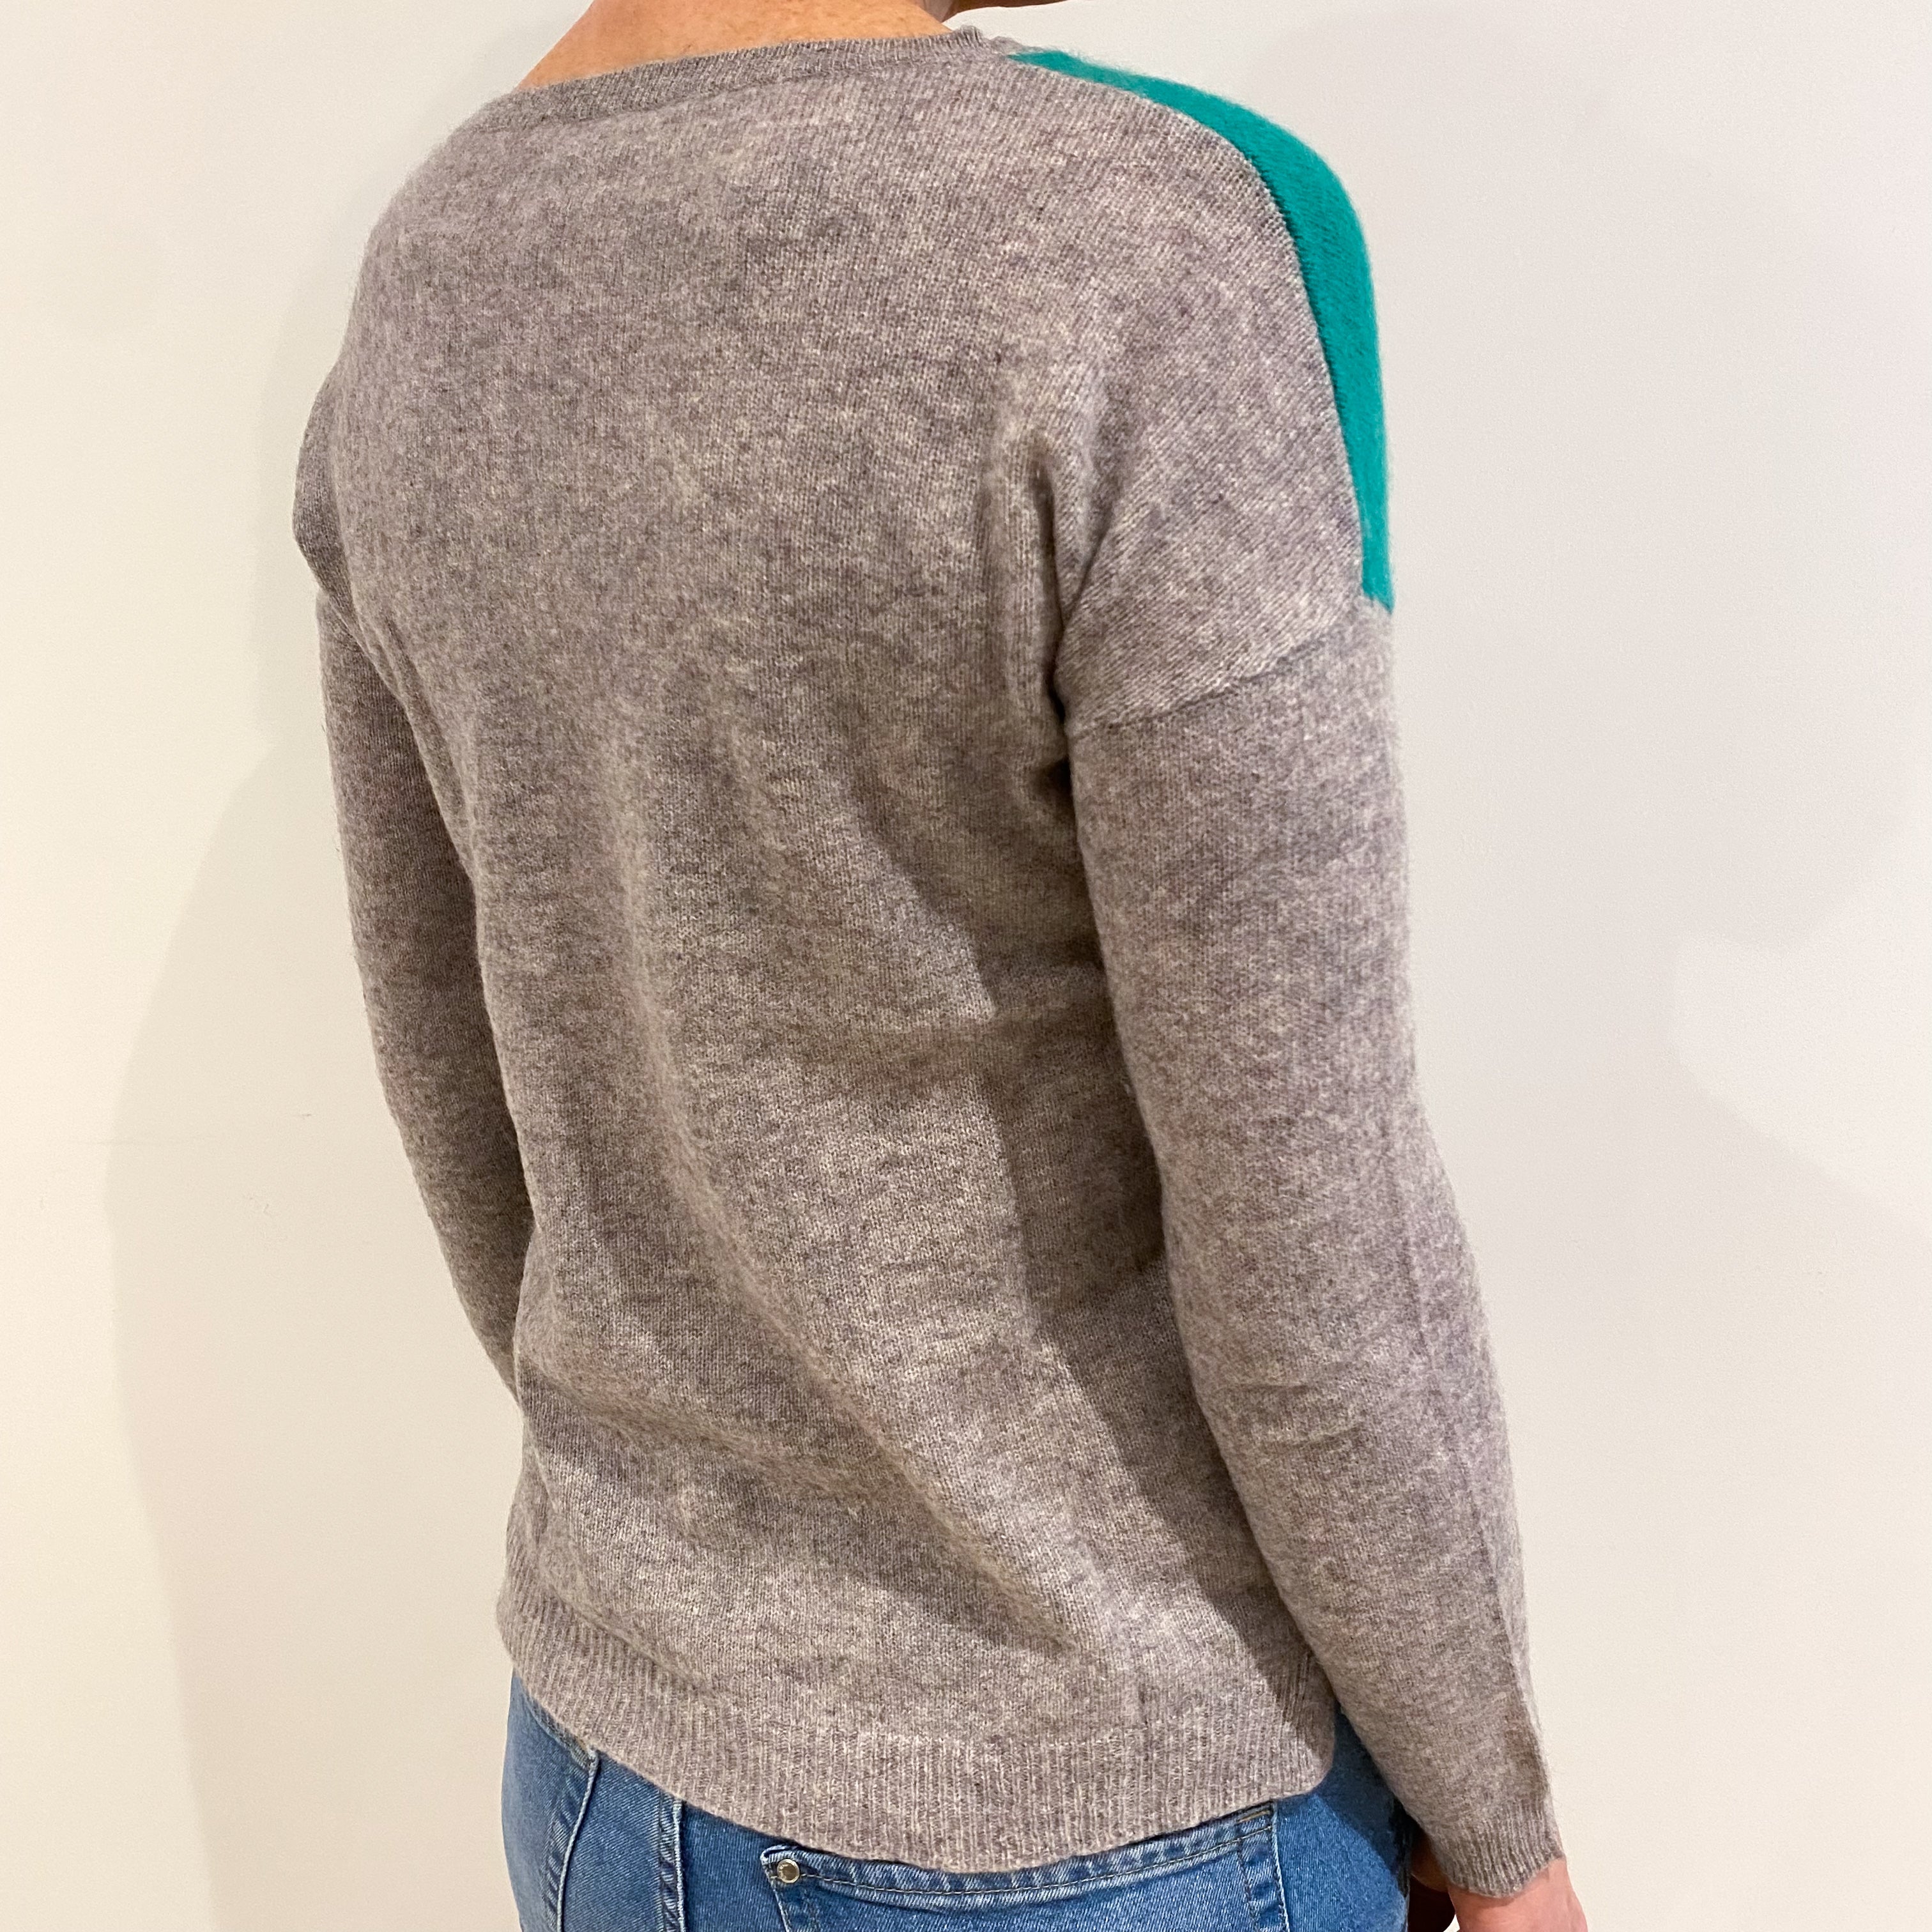 Jade Green and Smoke Grey Cashmere Crew Neck Jumper Small